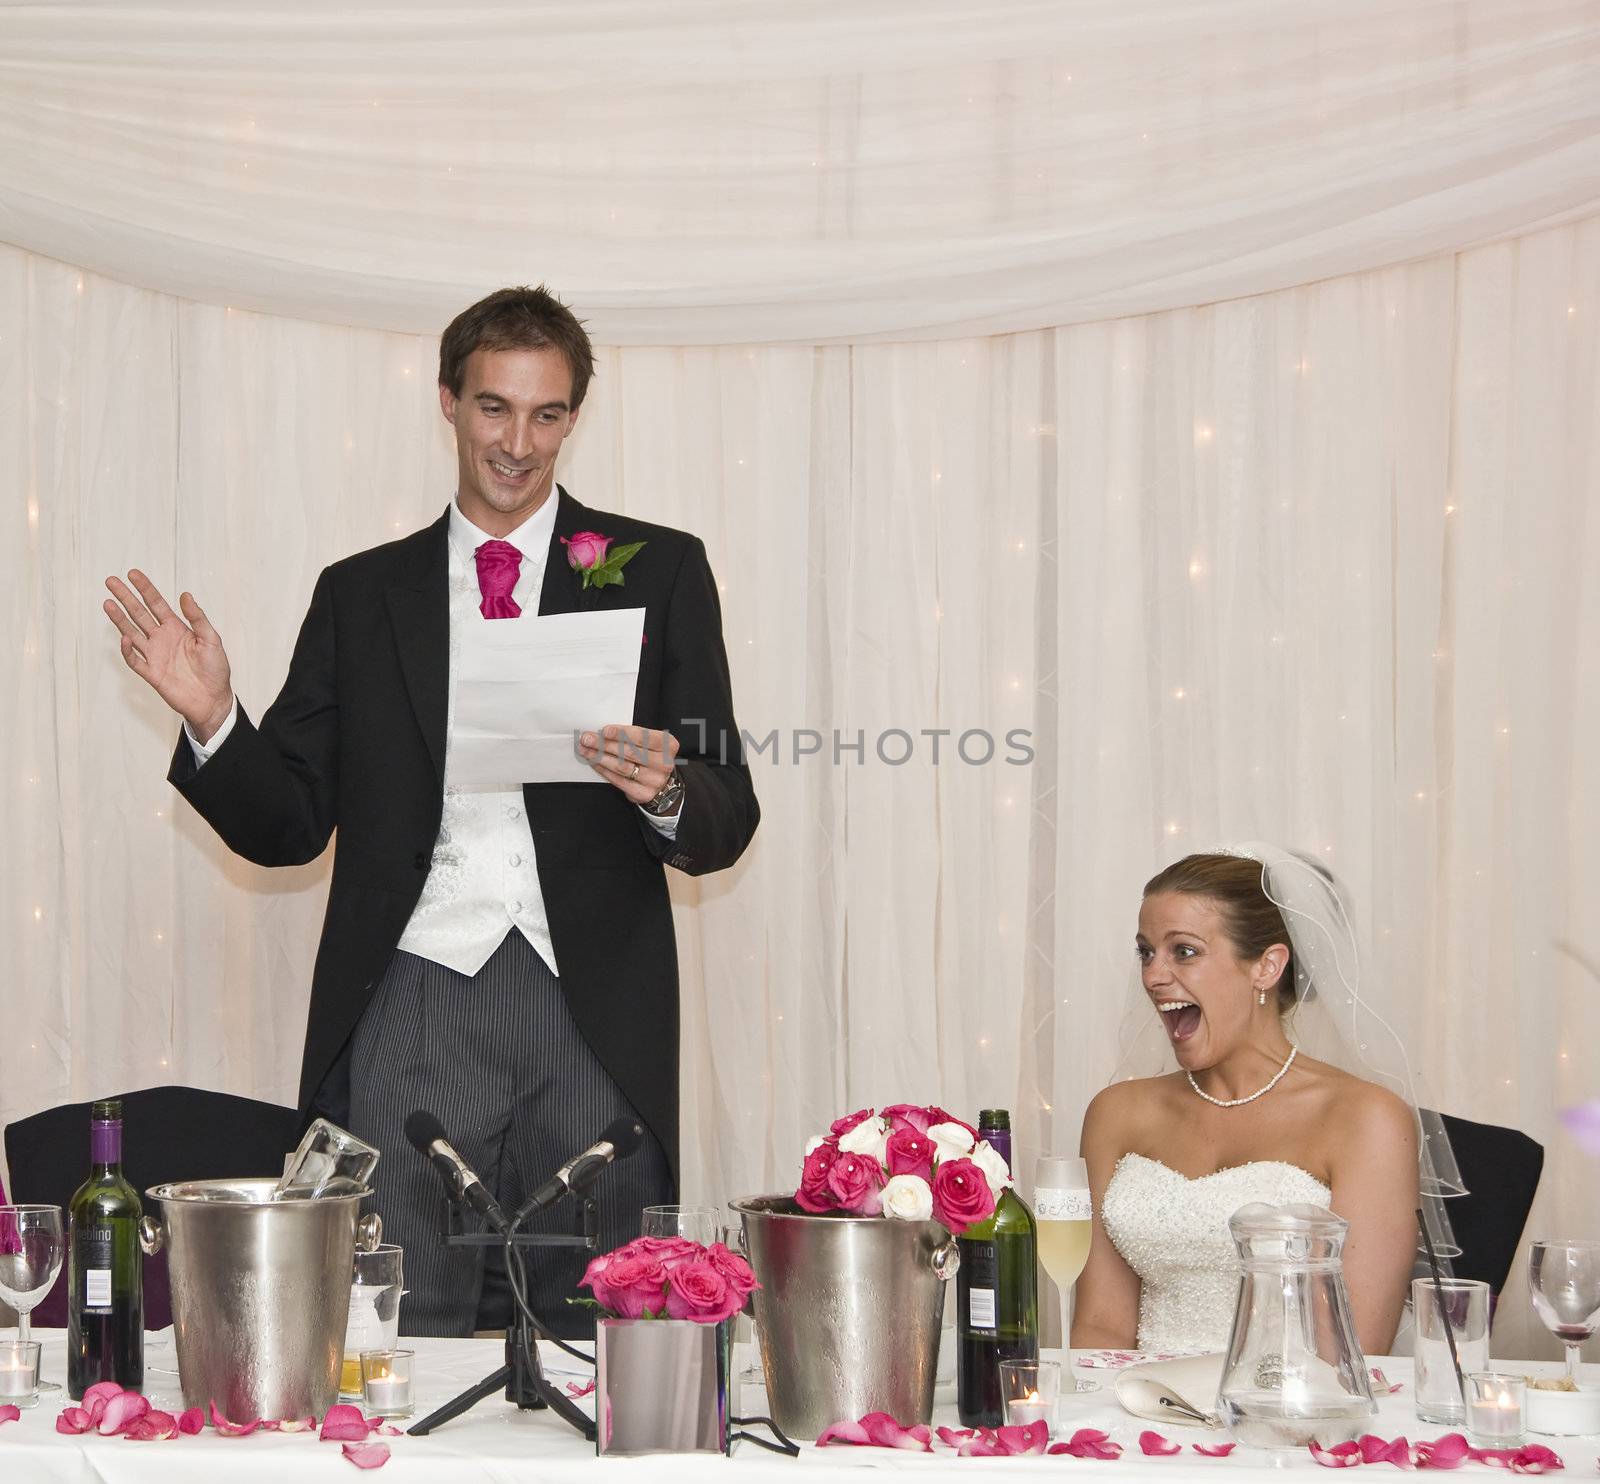 Attractive young bride grimaces at groom's speech during real wedding reception